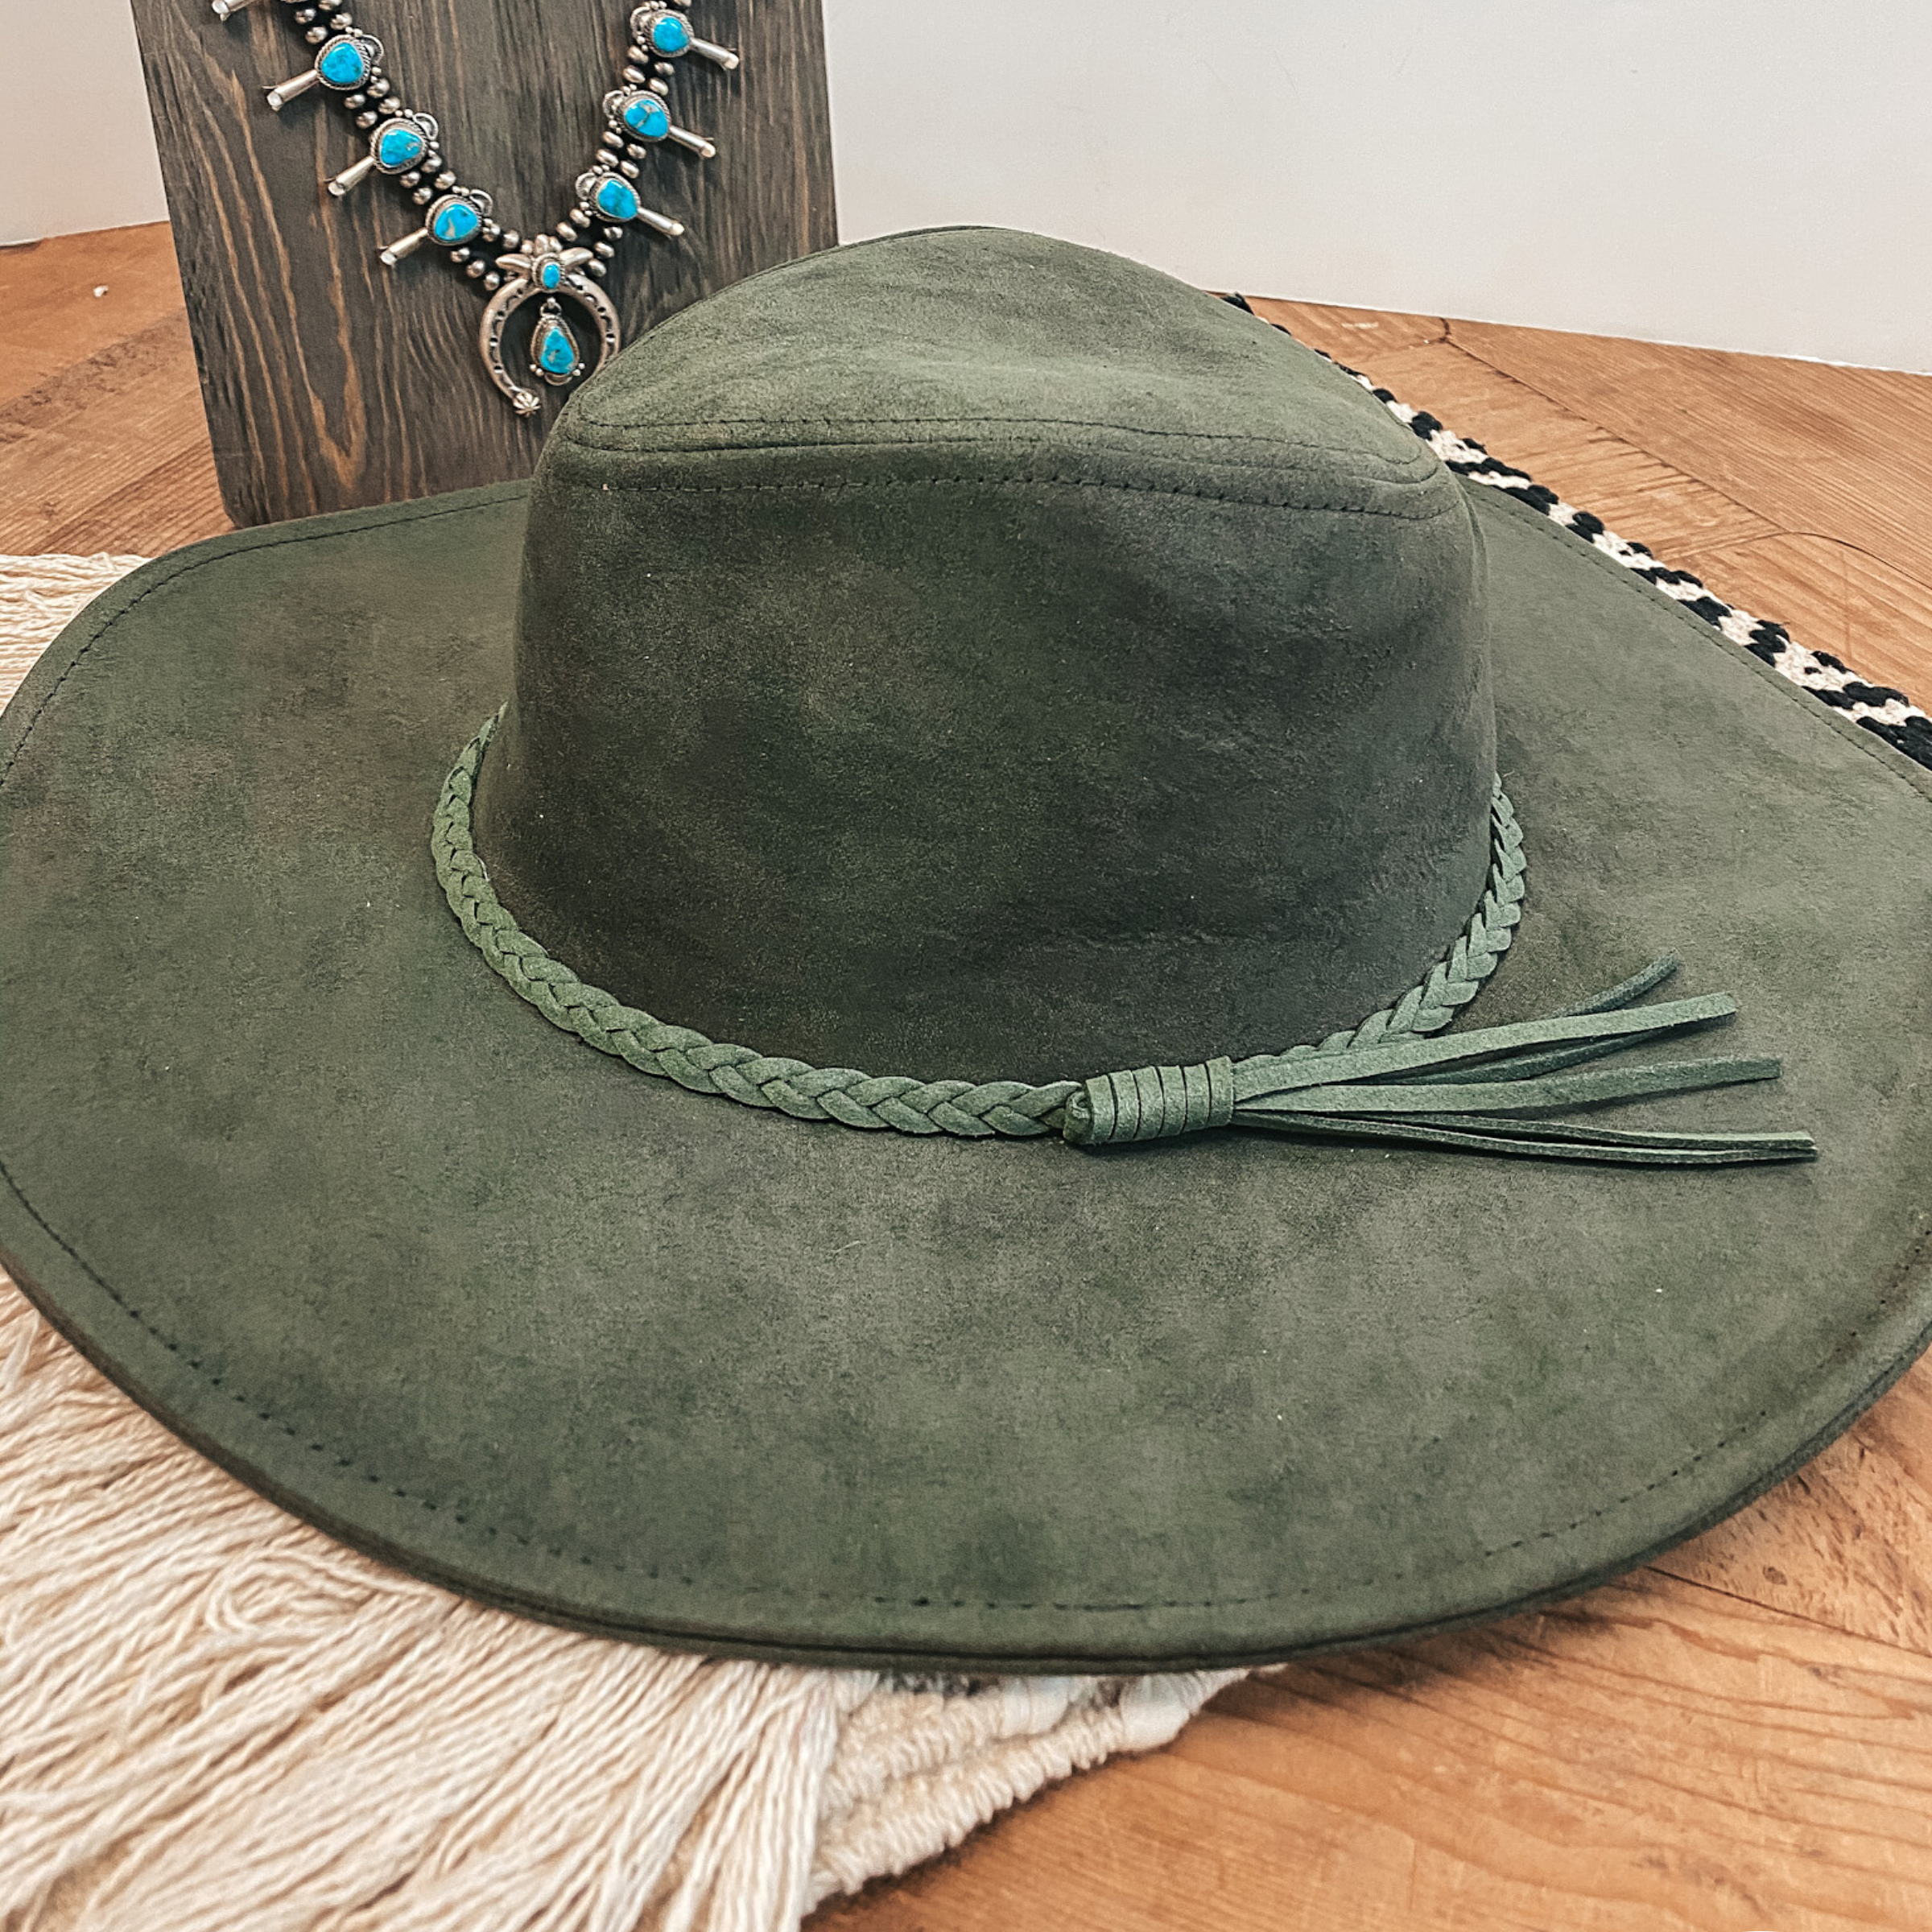 Oklahoma Hills Floppy Brim Faux Felt Hat in Olive Green - Giddy Up Glamour Boutique